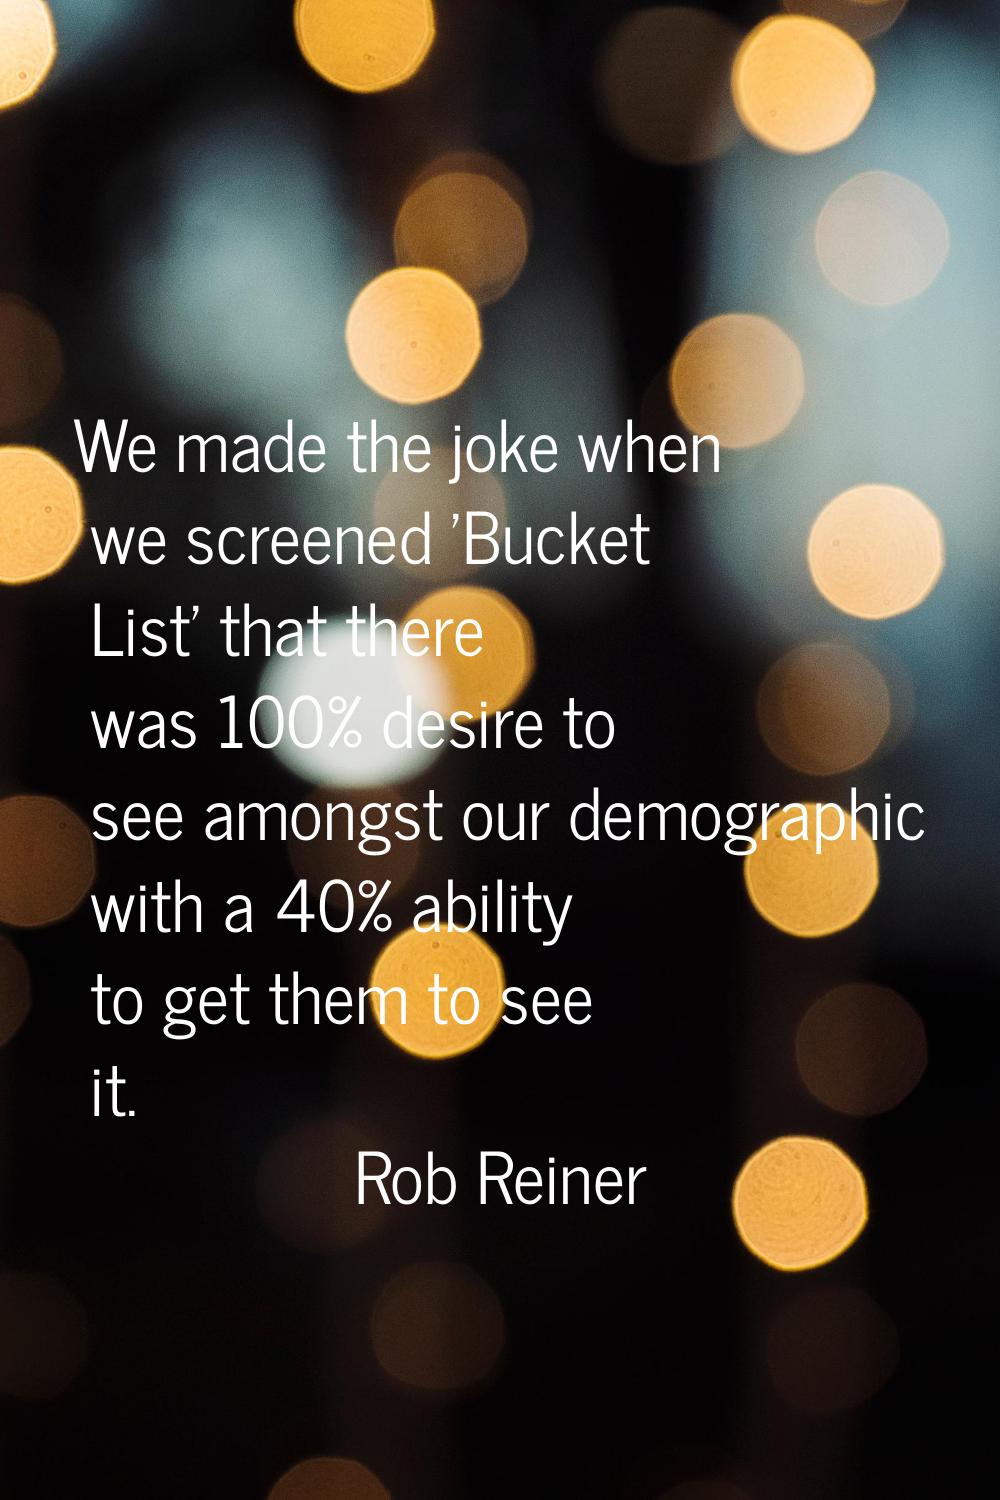 We made the joke when we screened 'Bucket List' that there was 100% desire to see amongst our demog